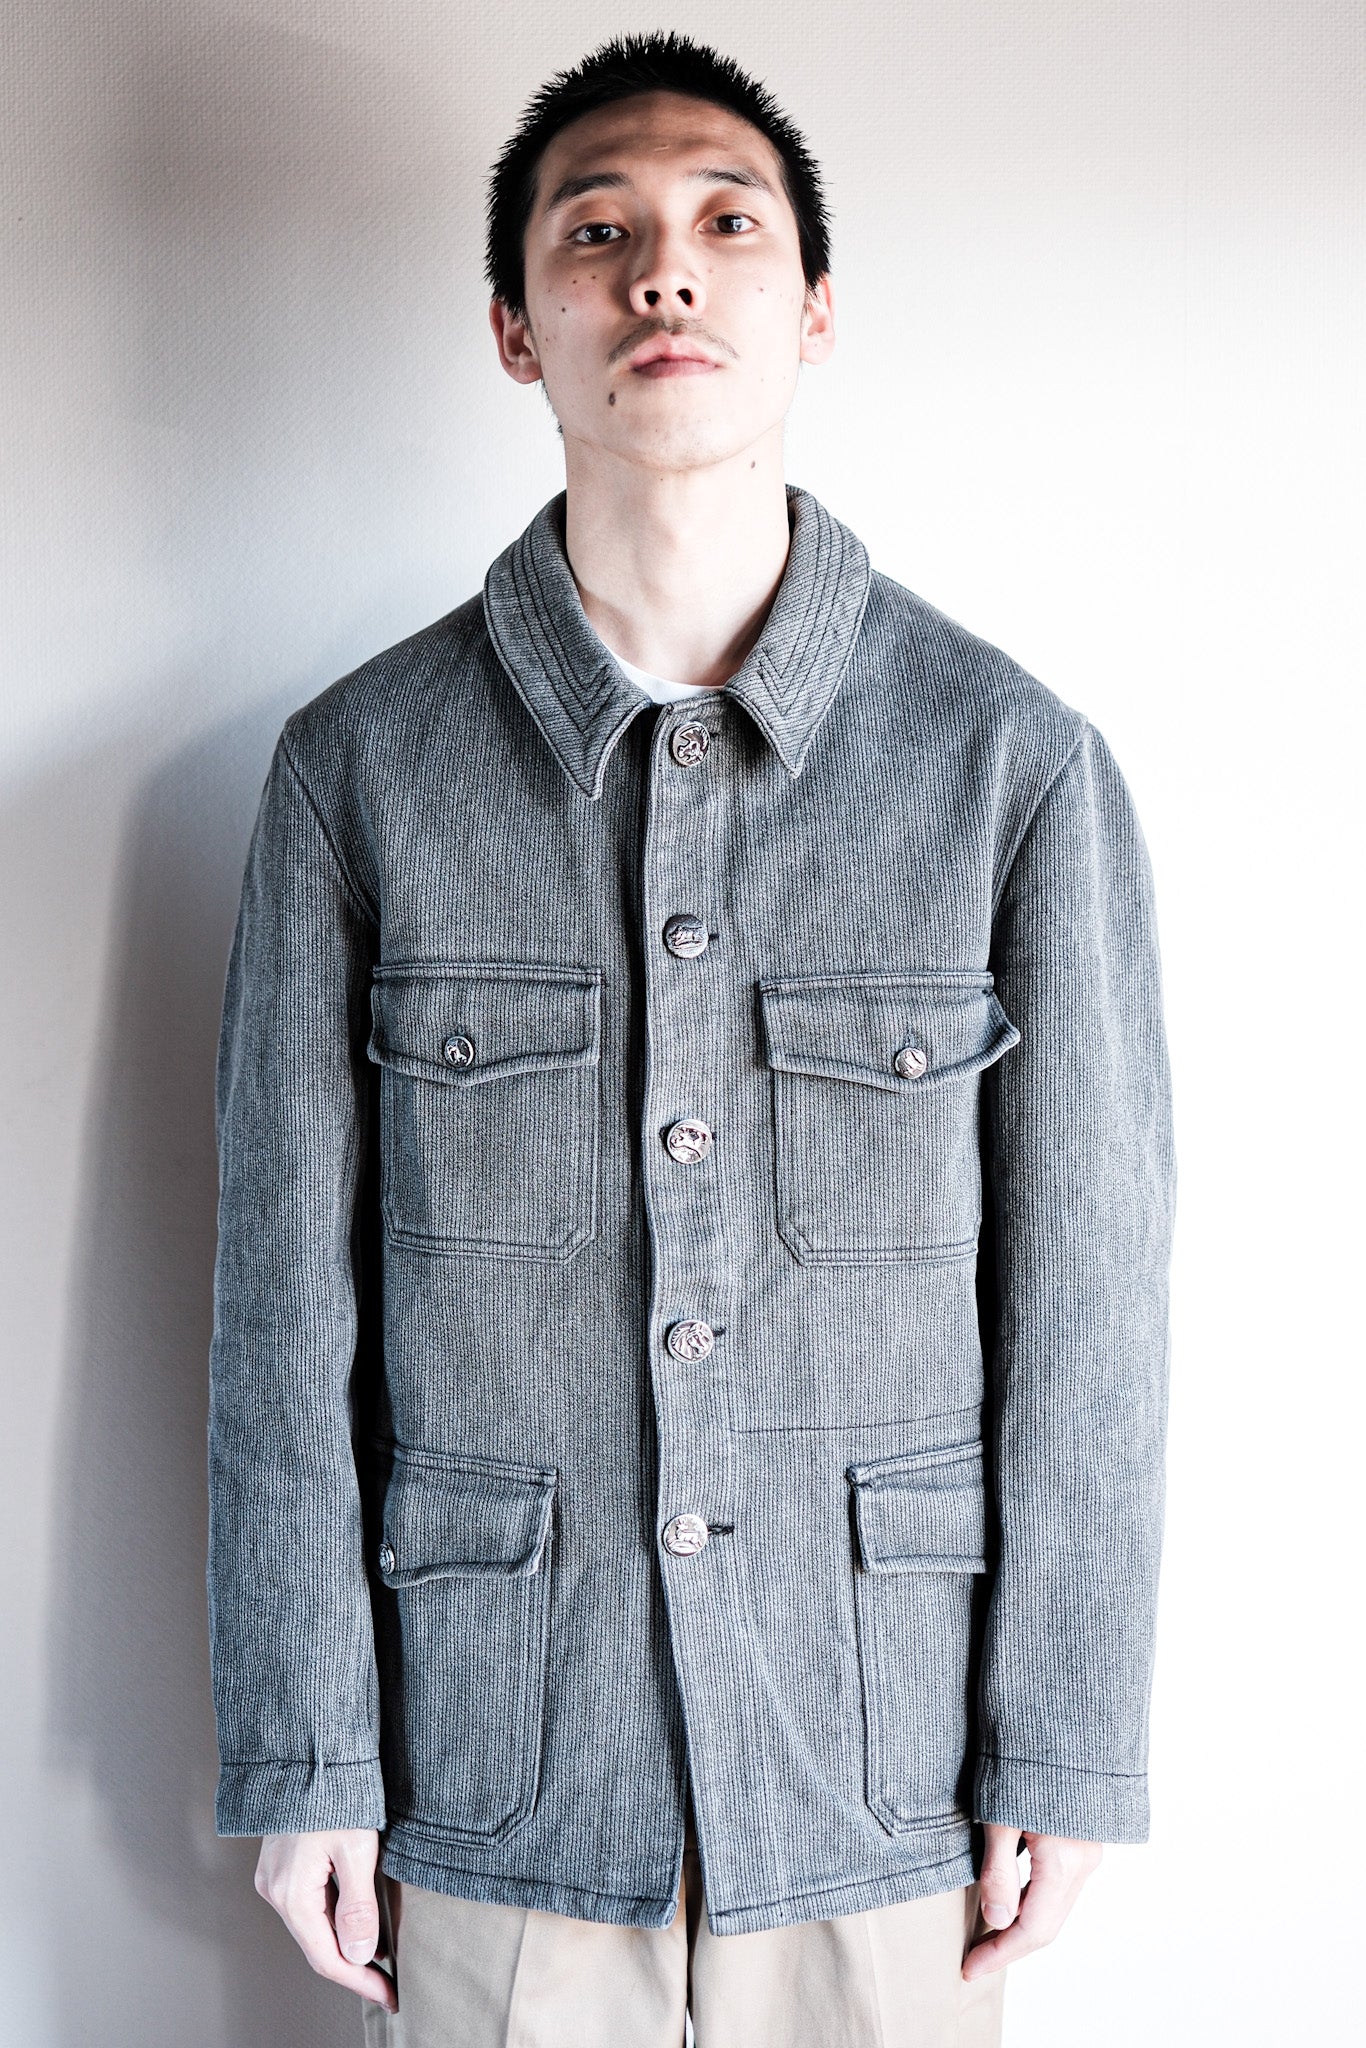 [~ 60's] French Vintage Gray Cotton Pique Hunting Jacket